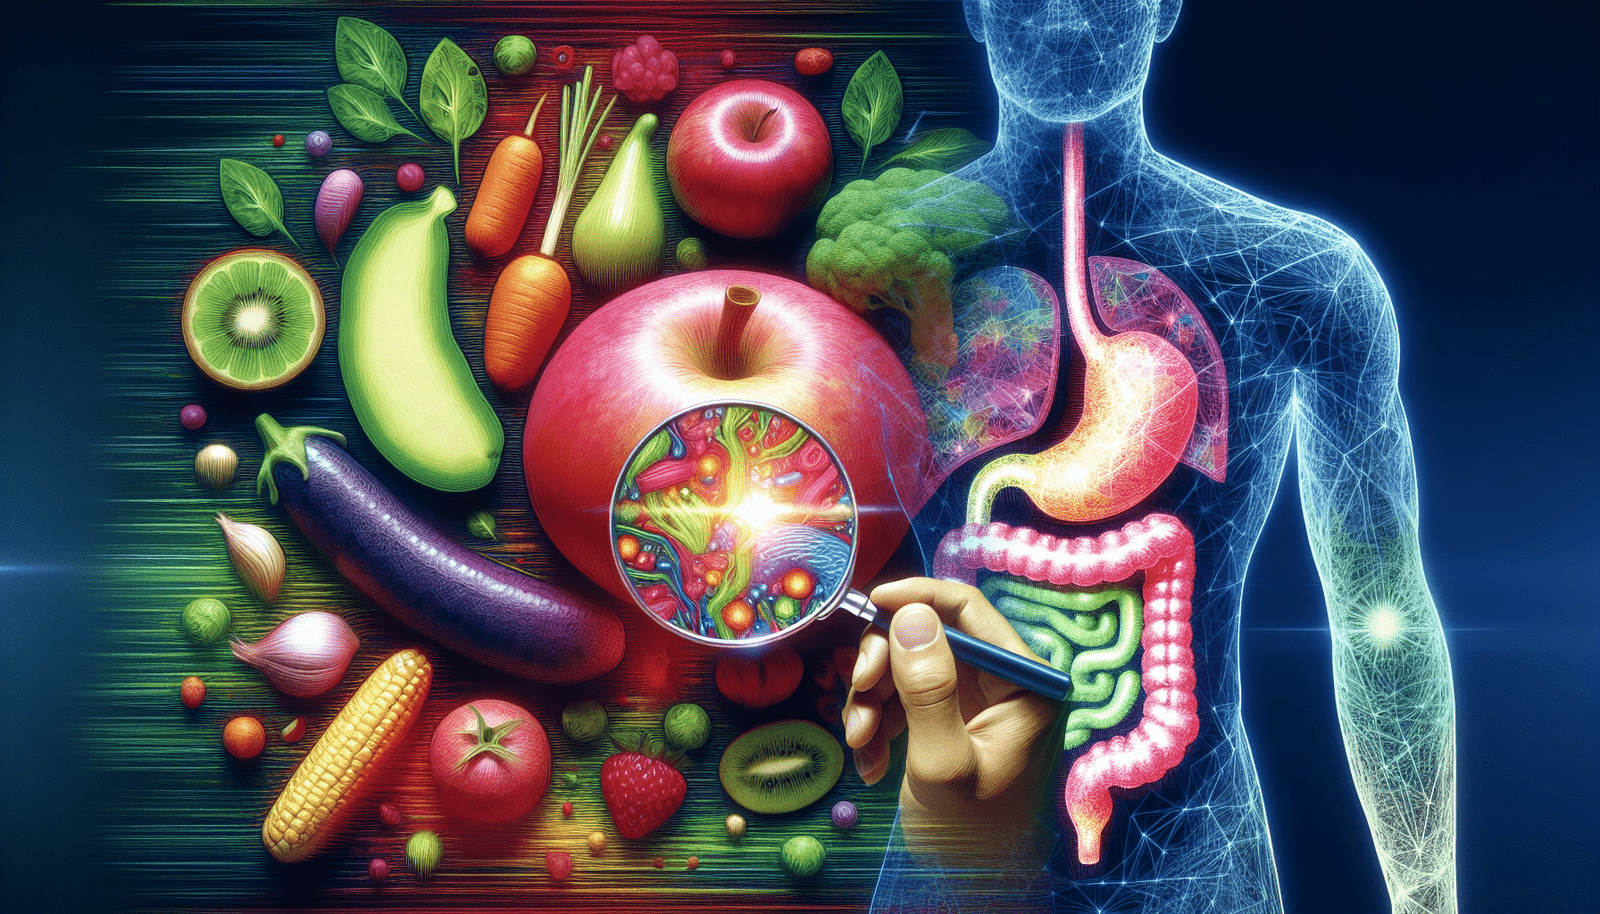 How Do Functional Foods Interact With The Microbiome?